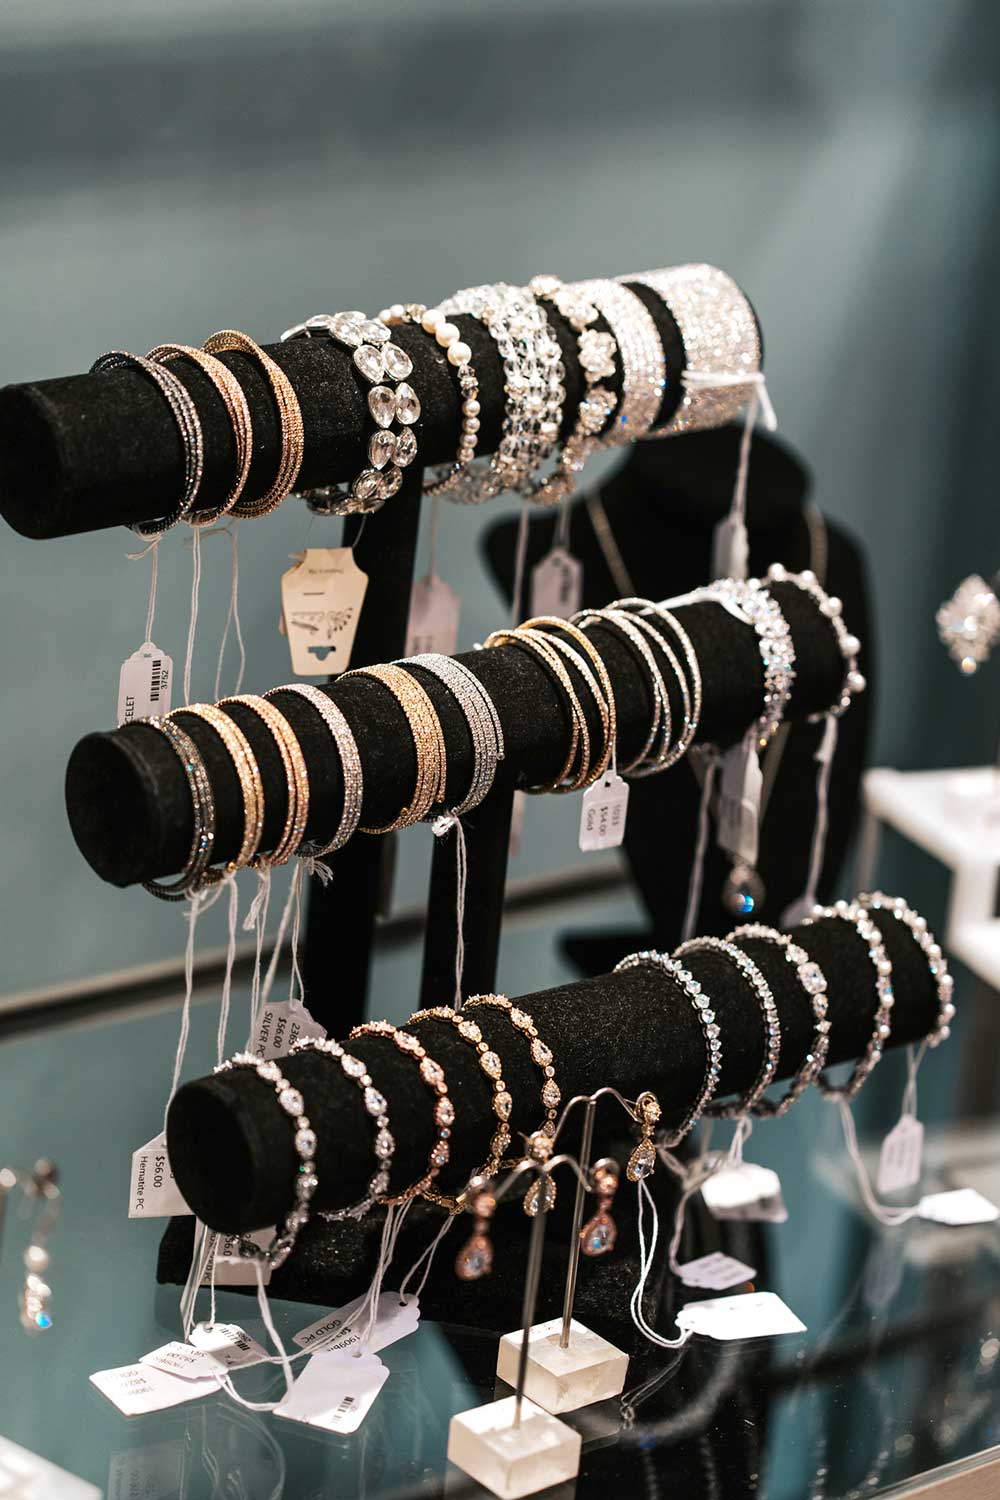 A display of bracelets on display in a bridal store.